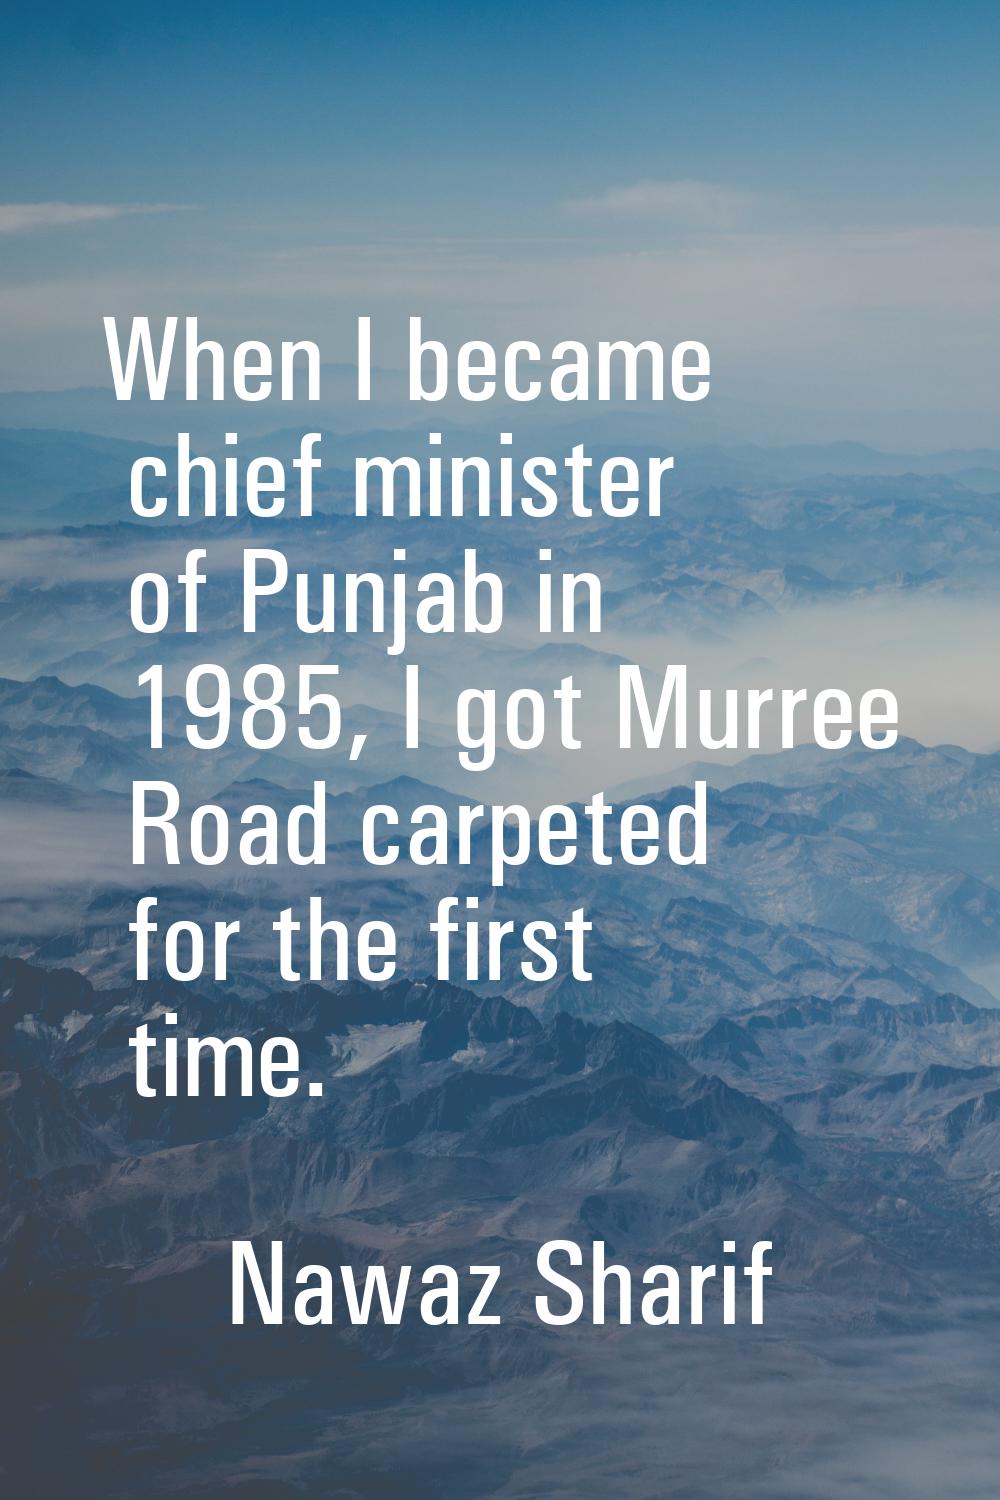 When I became chief minister of Punjab in 1985, I got Murree Road carpeted for the first time.